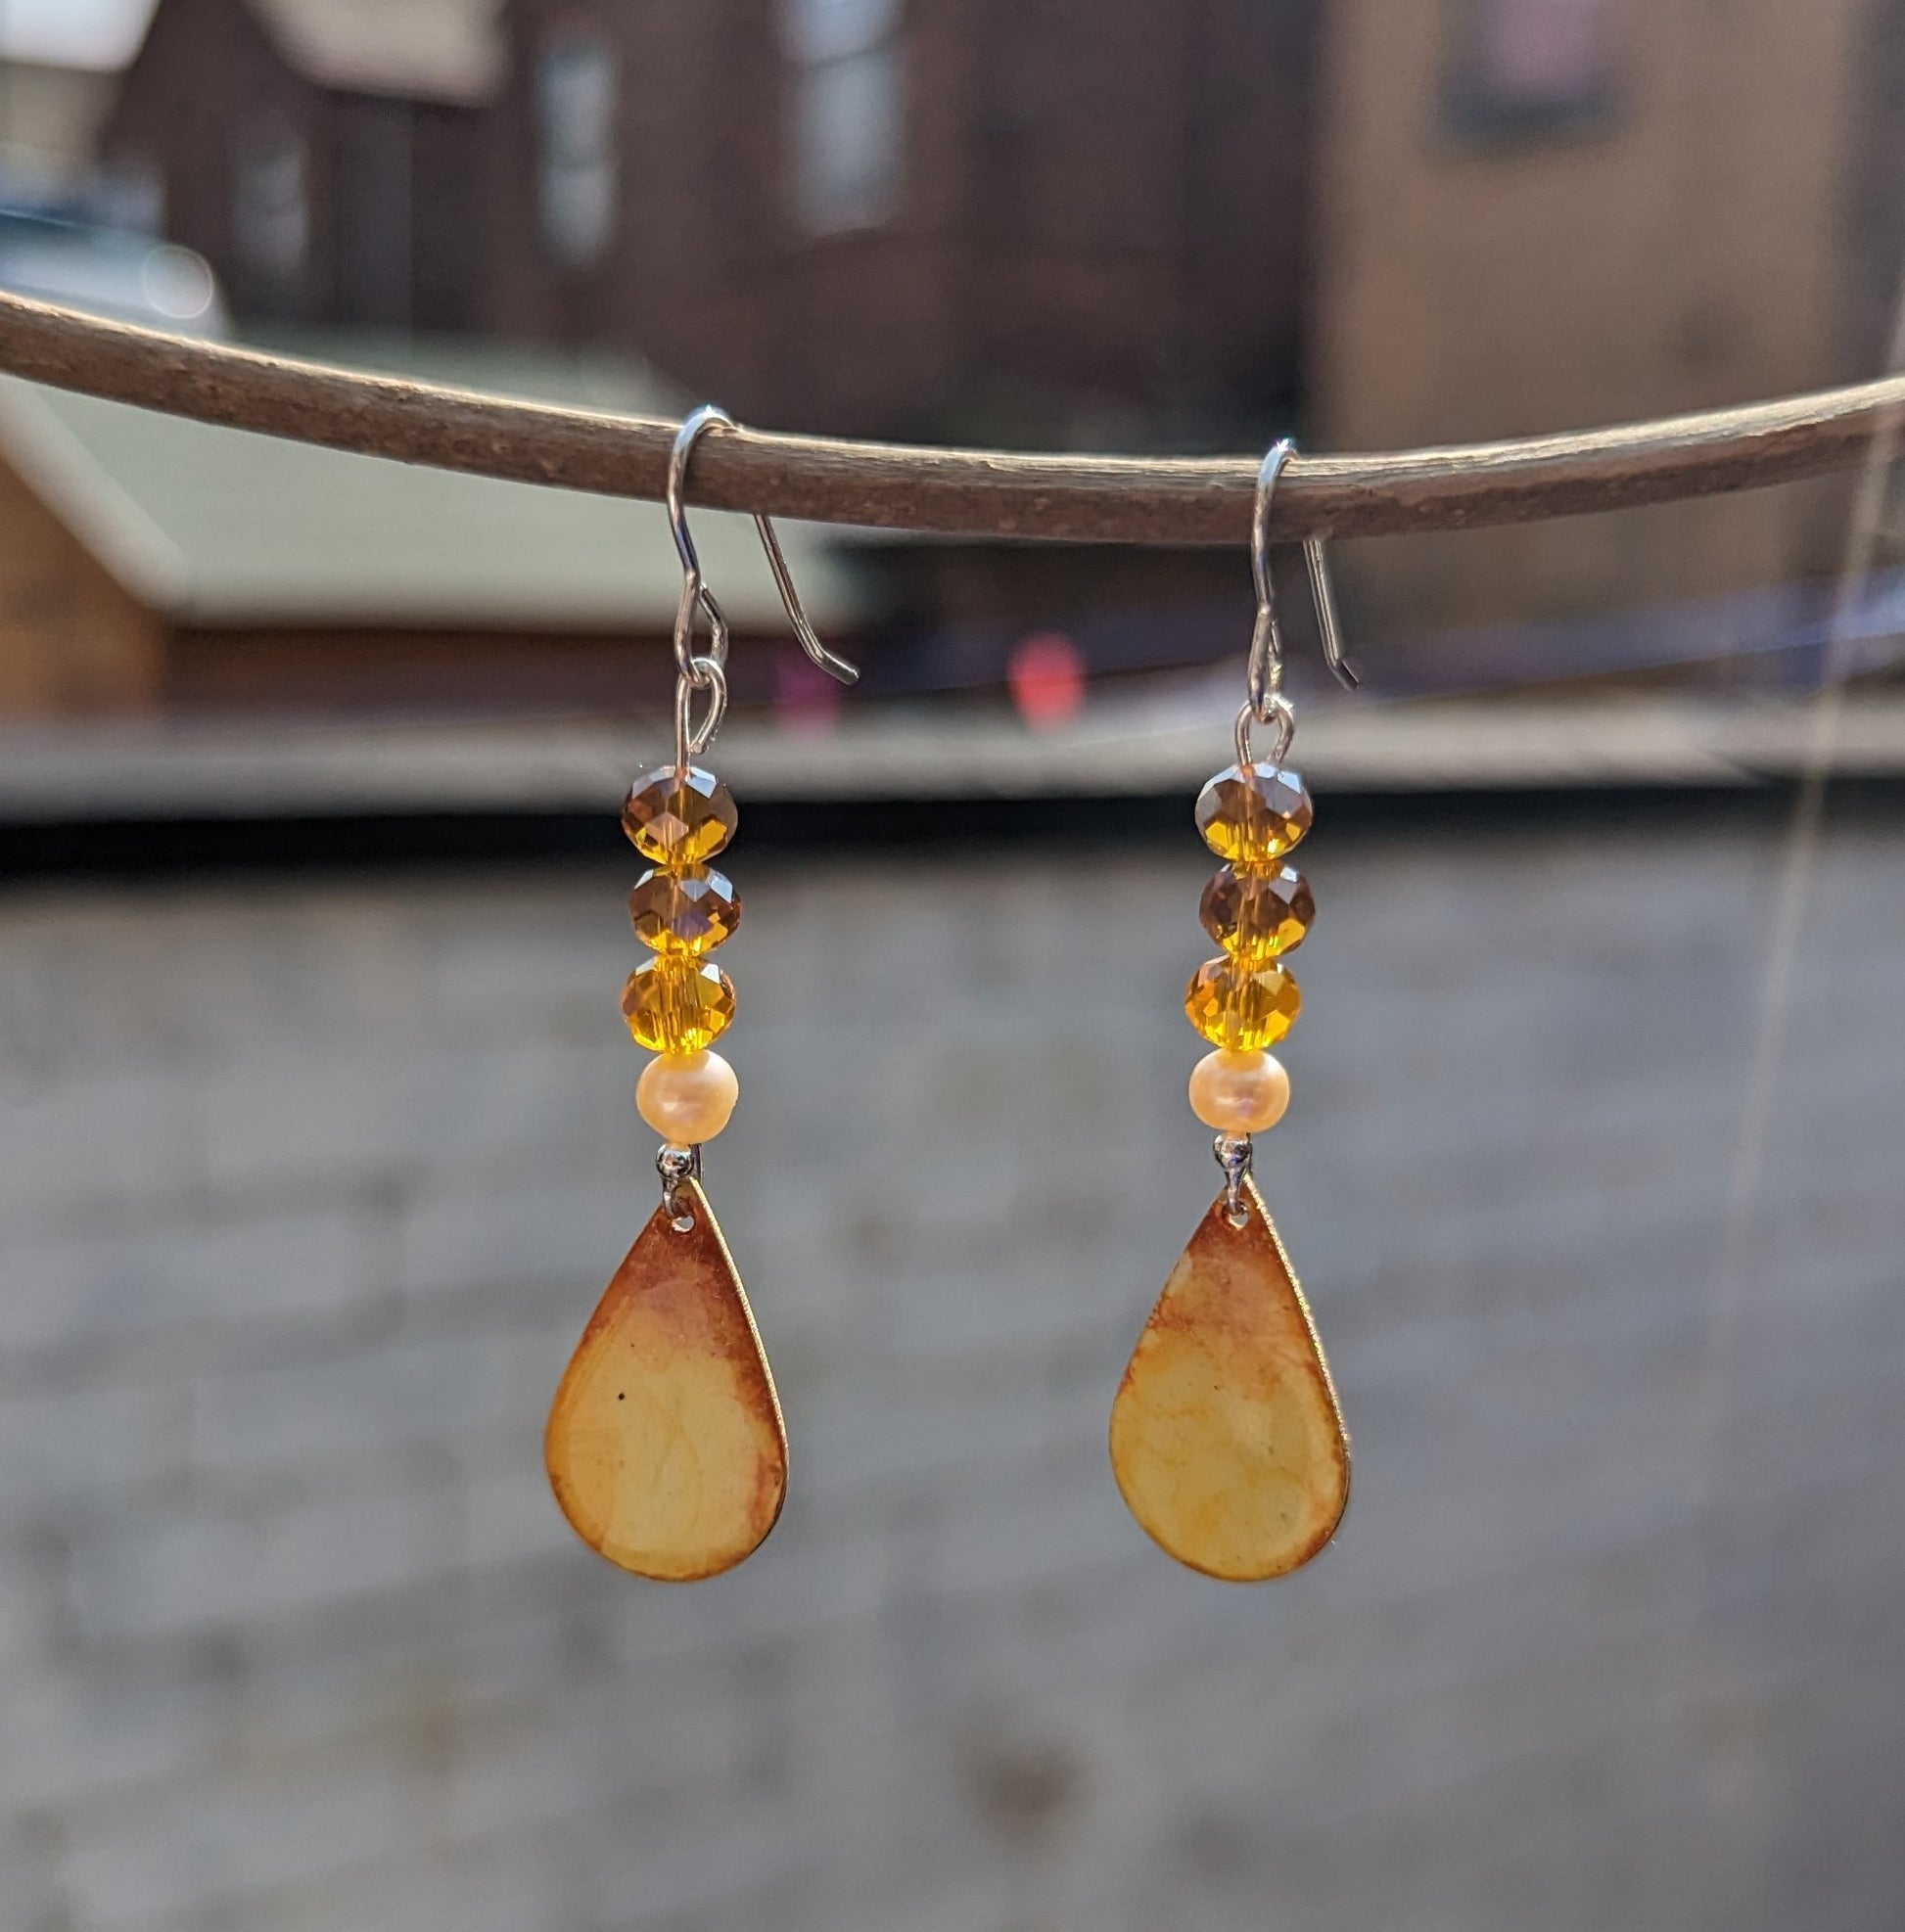 Warm yellow earrings and sparkling crystals 